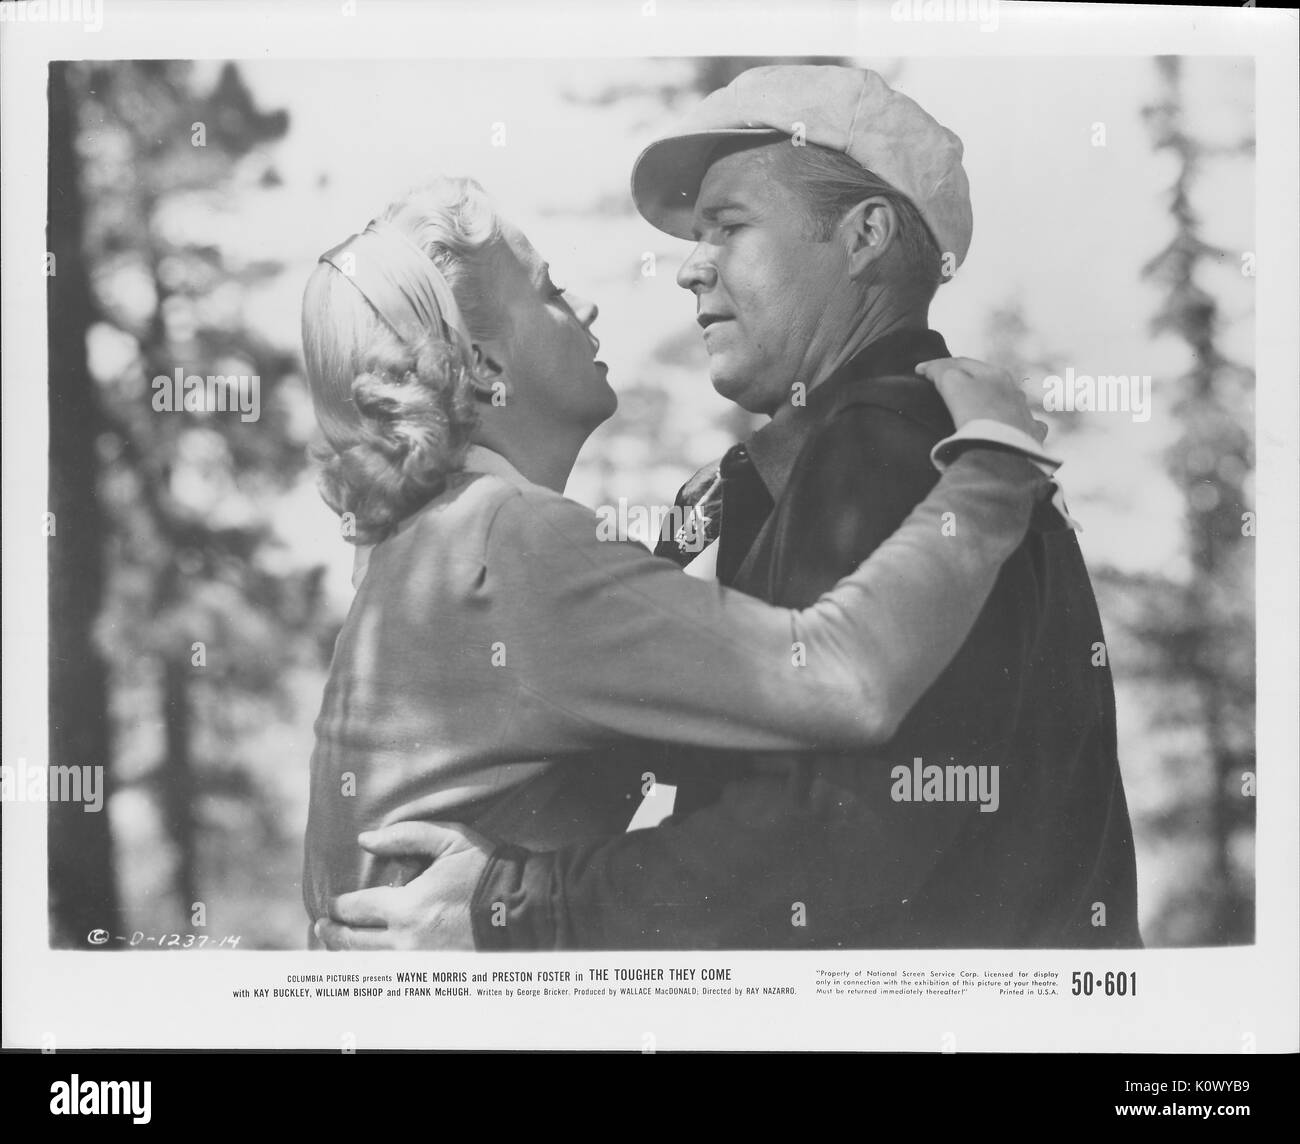 A movie still scene from 'The Tougher They Come' (1950 Columbia Pictures film), showing a man and a woman holding on to each other, with the woman looking up to her man as she says something serious to him, 1950. Stock Photo